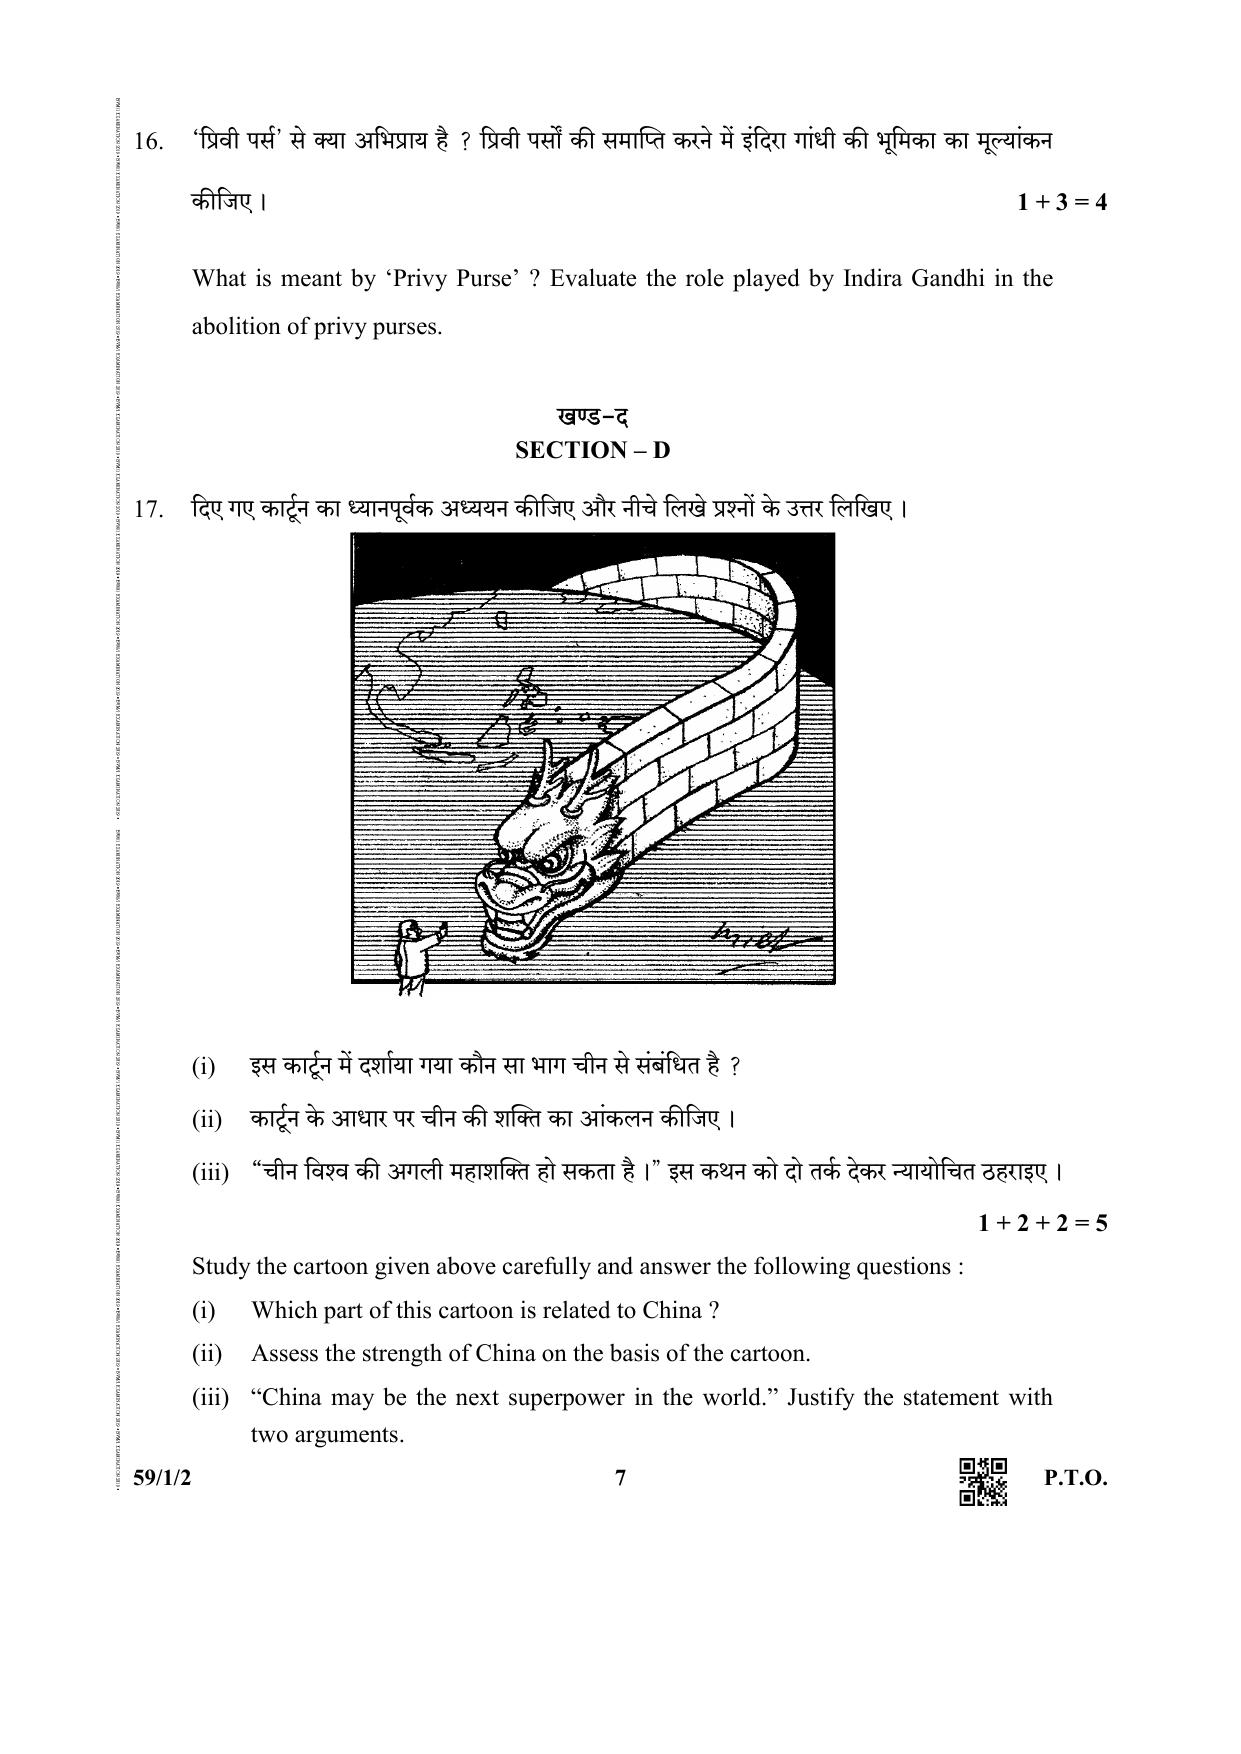 CBSE Class 12 59-1-2 (Political Science) 2019 Question Paper - Page 7